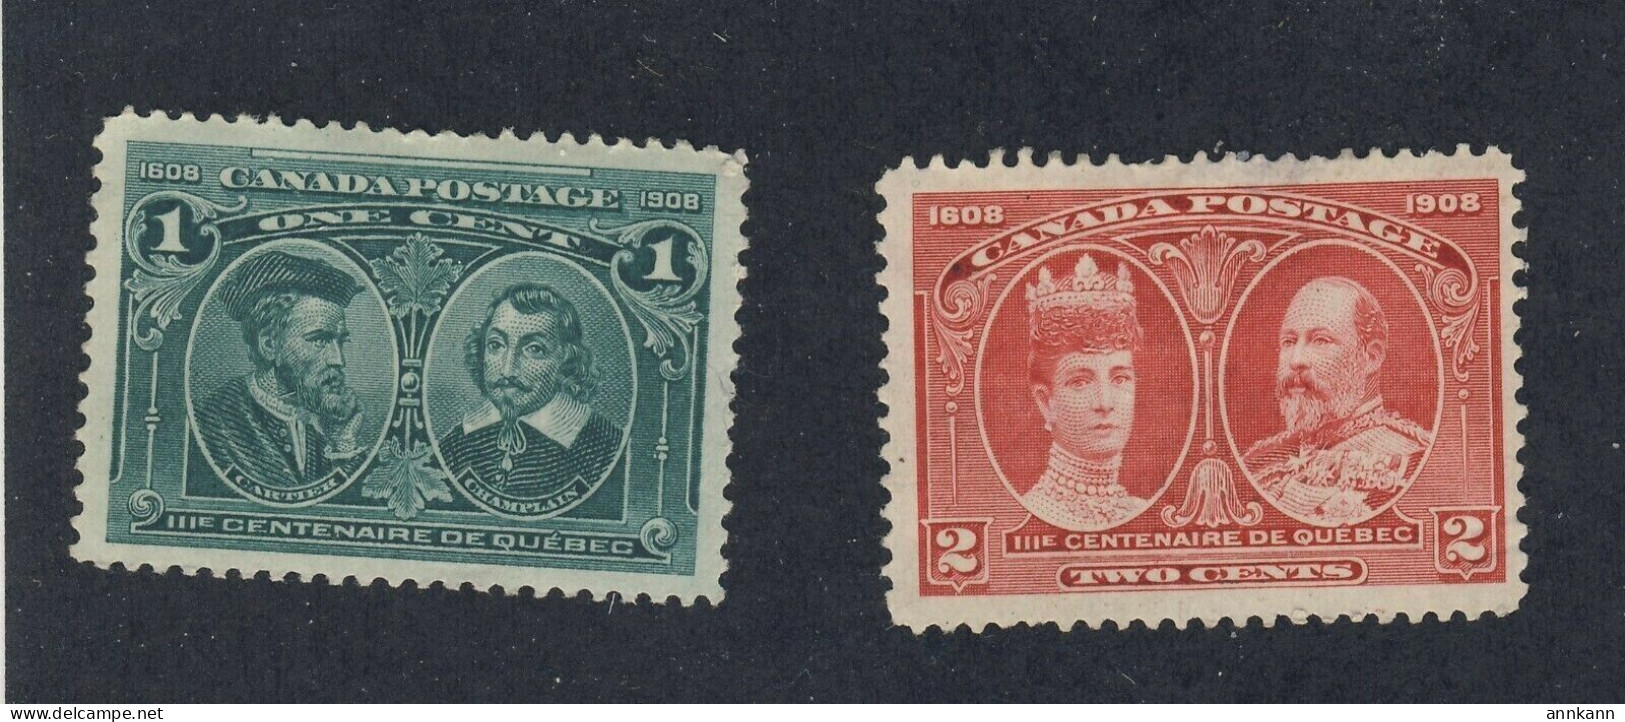 2x Canada 1908 Quebec Stamps #97-1c MNG VF #98-2c MH VF Guide Value = $120.00 - Unused Stamps